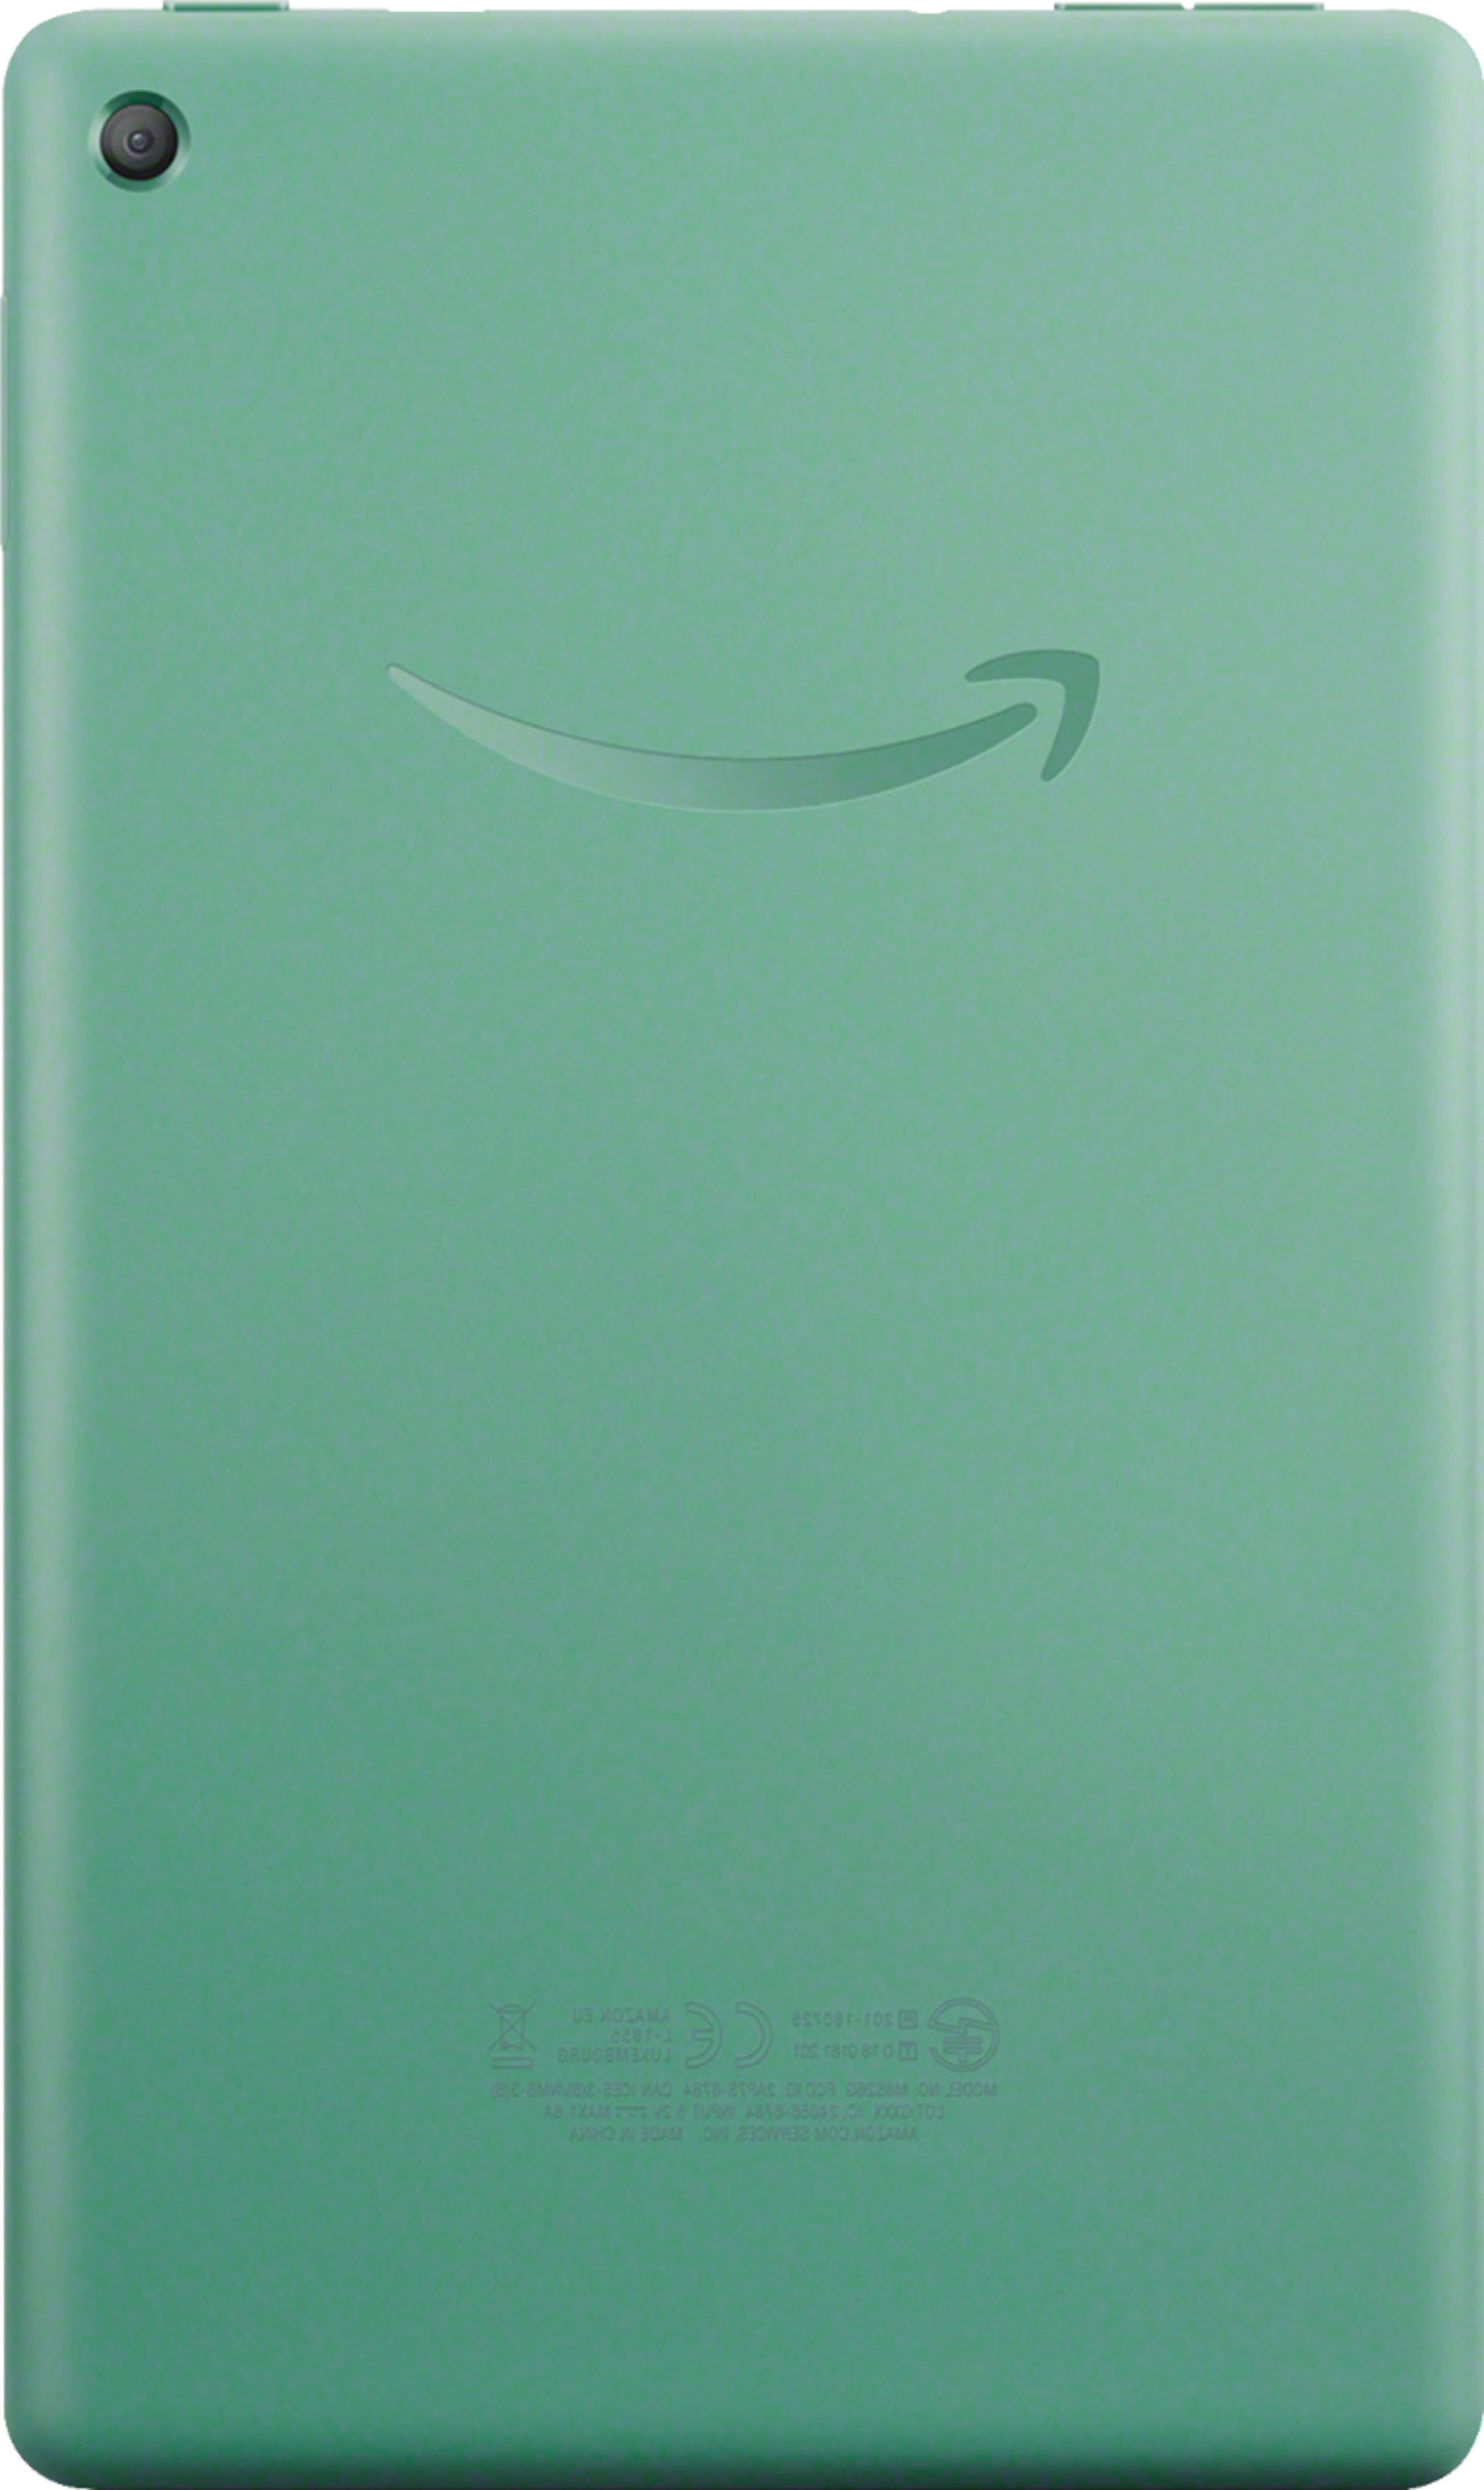 Back View: UltraLast - Replacement Portable Reader Battery for Amazon